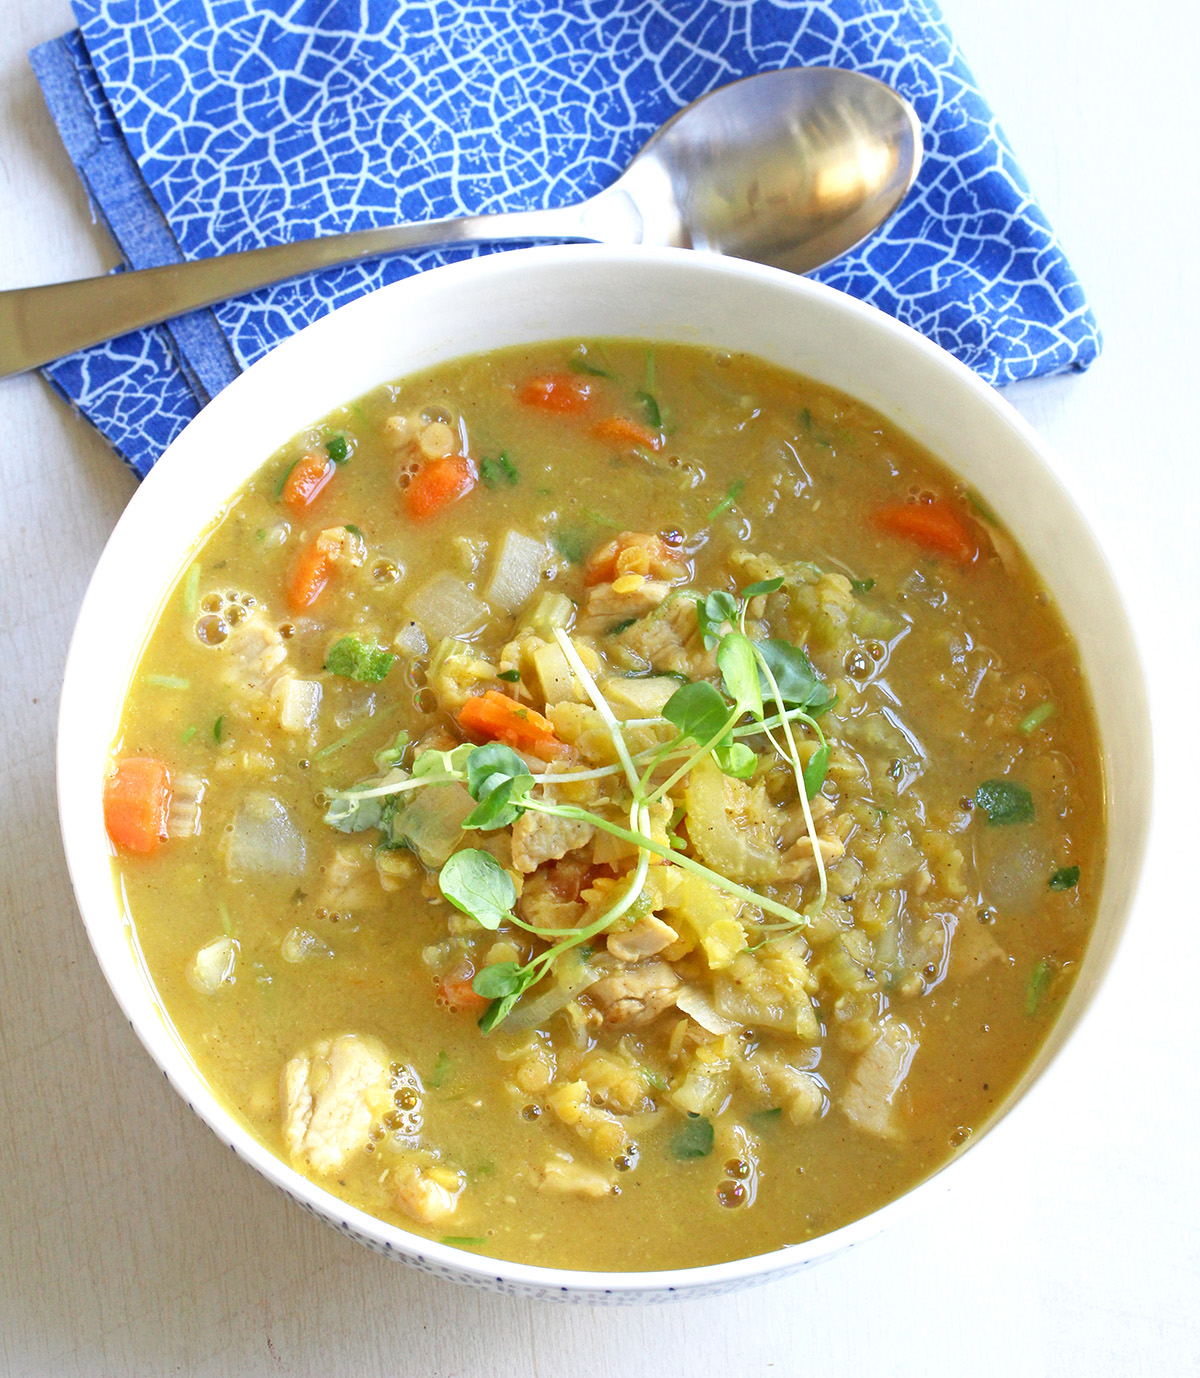 Low sodium chicken and red lentil stew in a bowl